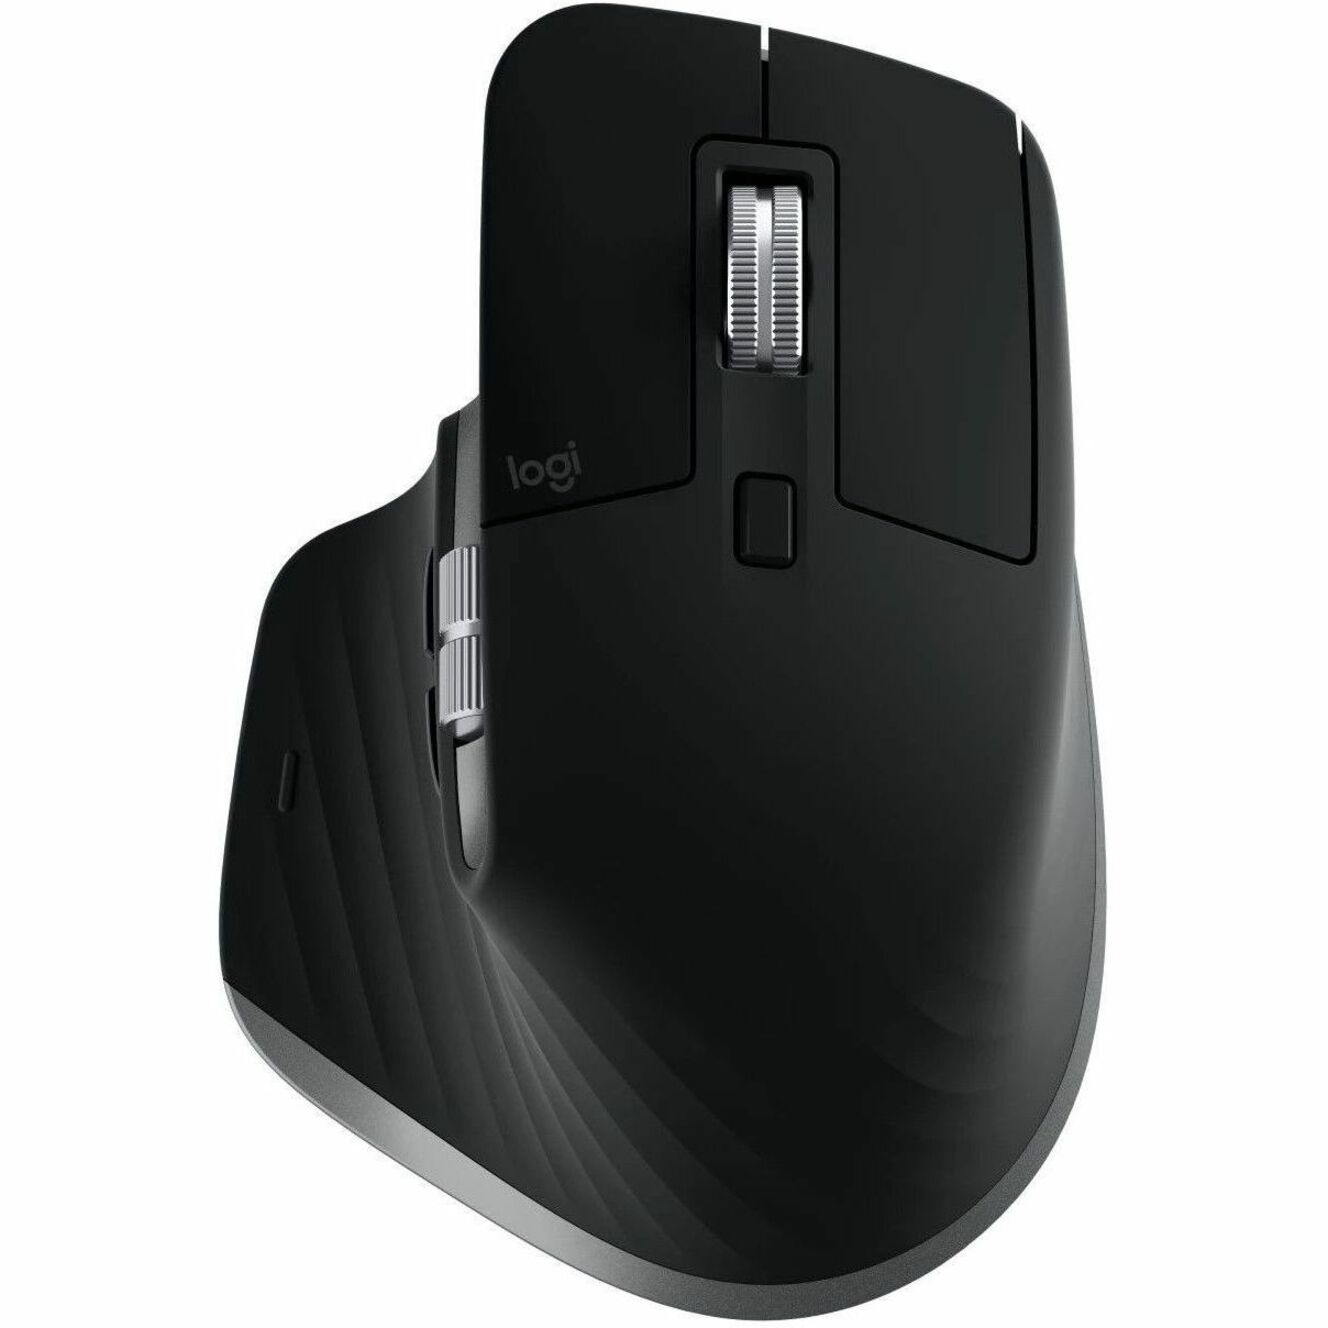 Logitech MX Master 3S Mouse - Performance Wireless Mouse for Mac [Discontinued]